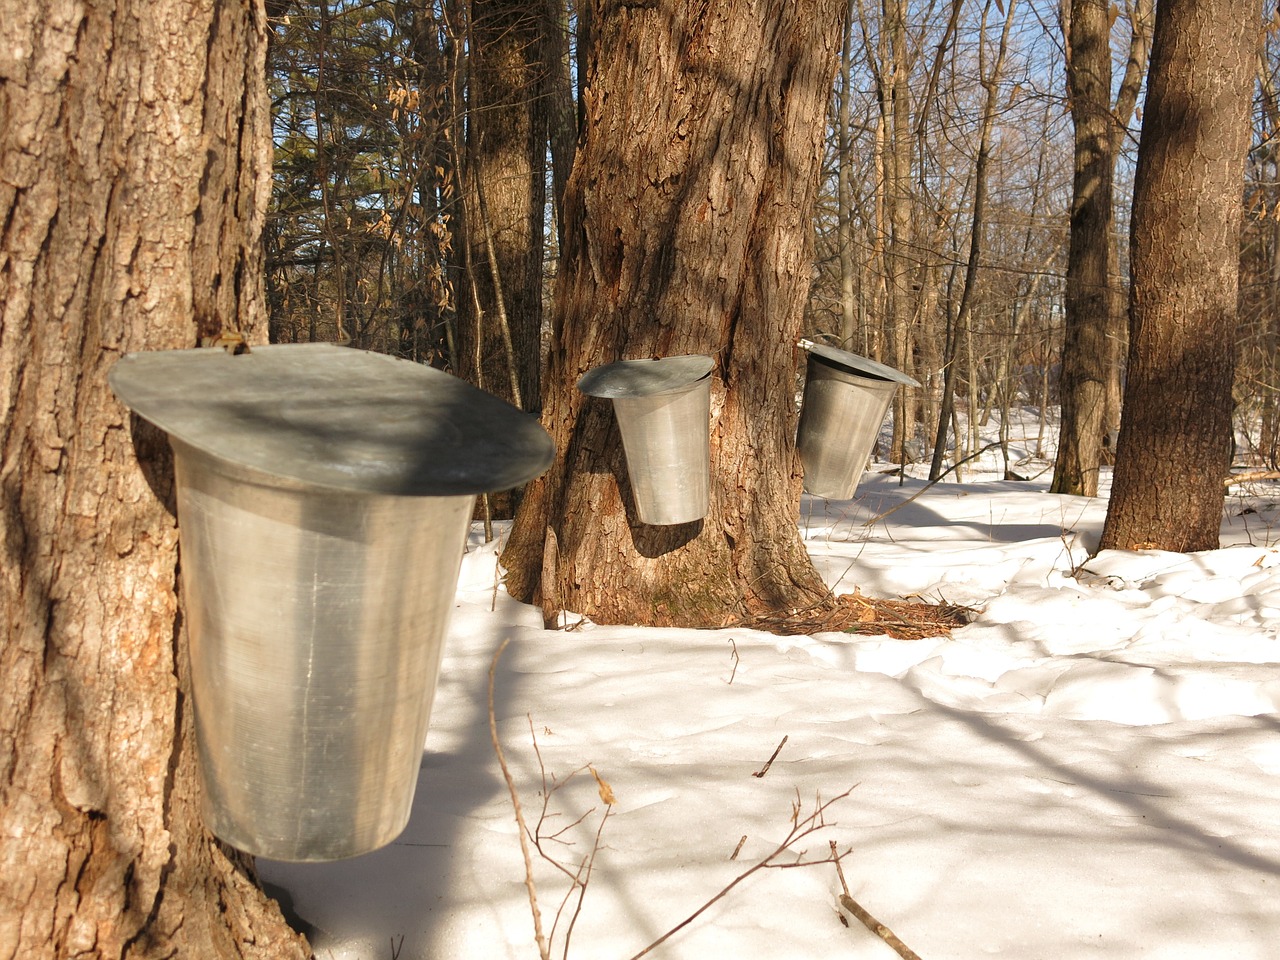 Drudge's Maple Syrup